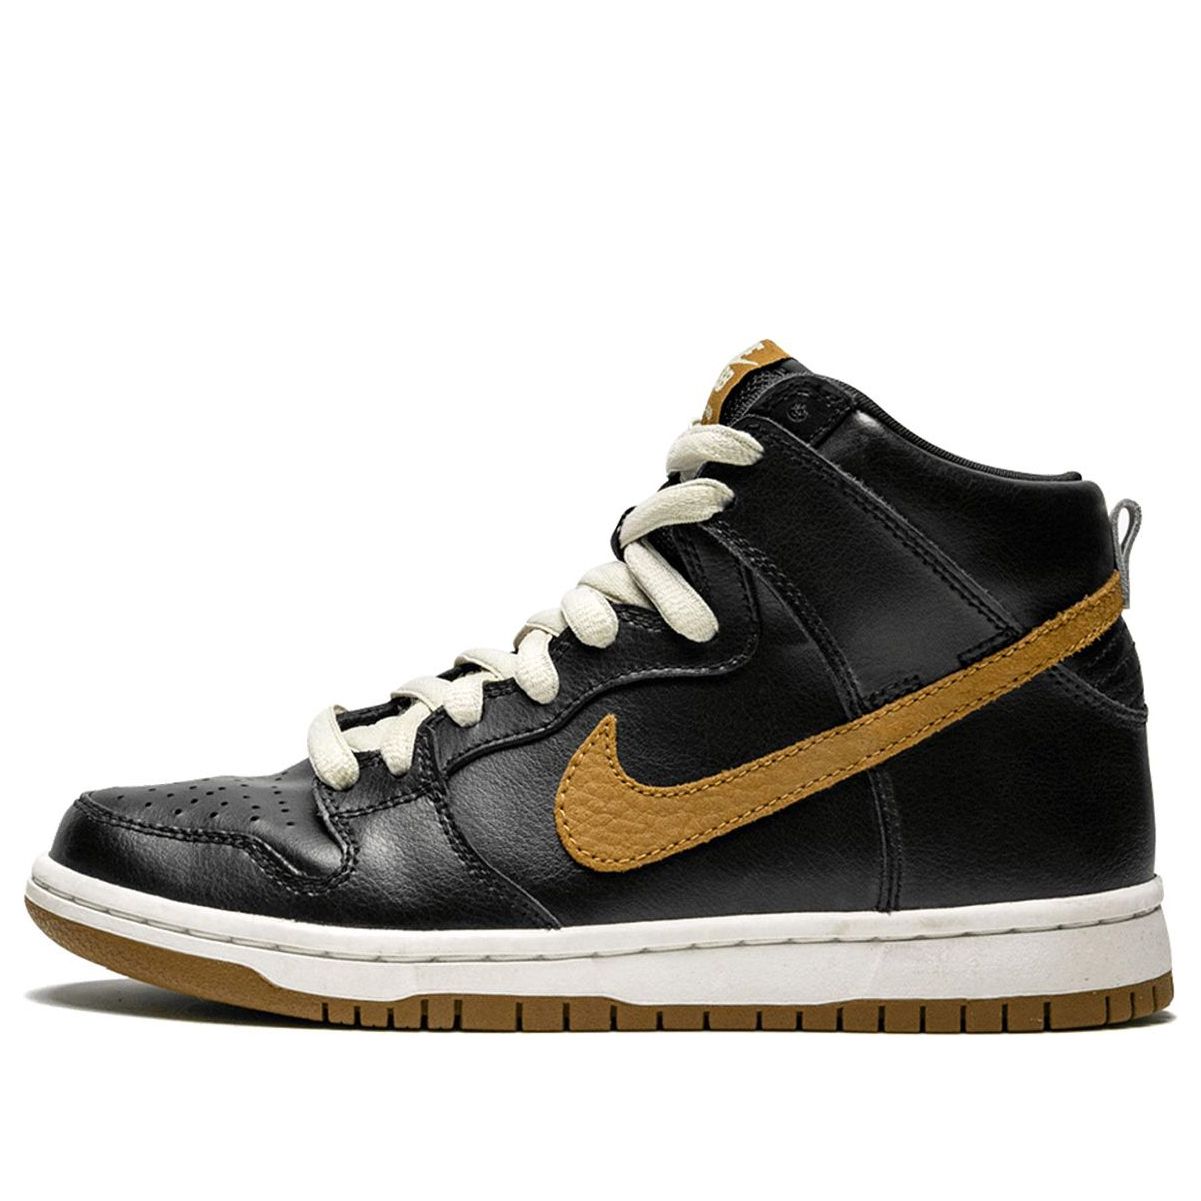 Nike Dunk High Pro SB 'Guinness'  305050-020 Iconic Trainers